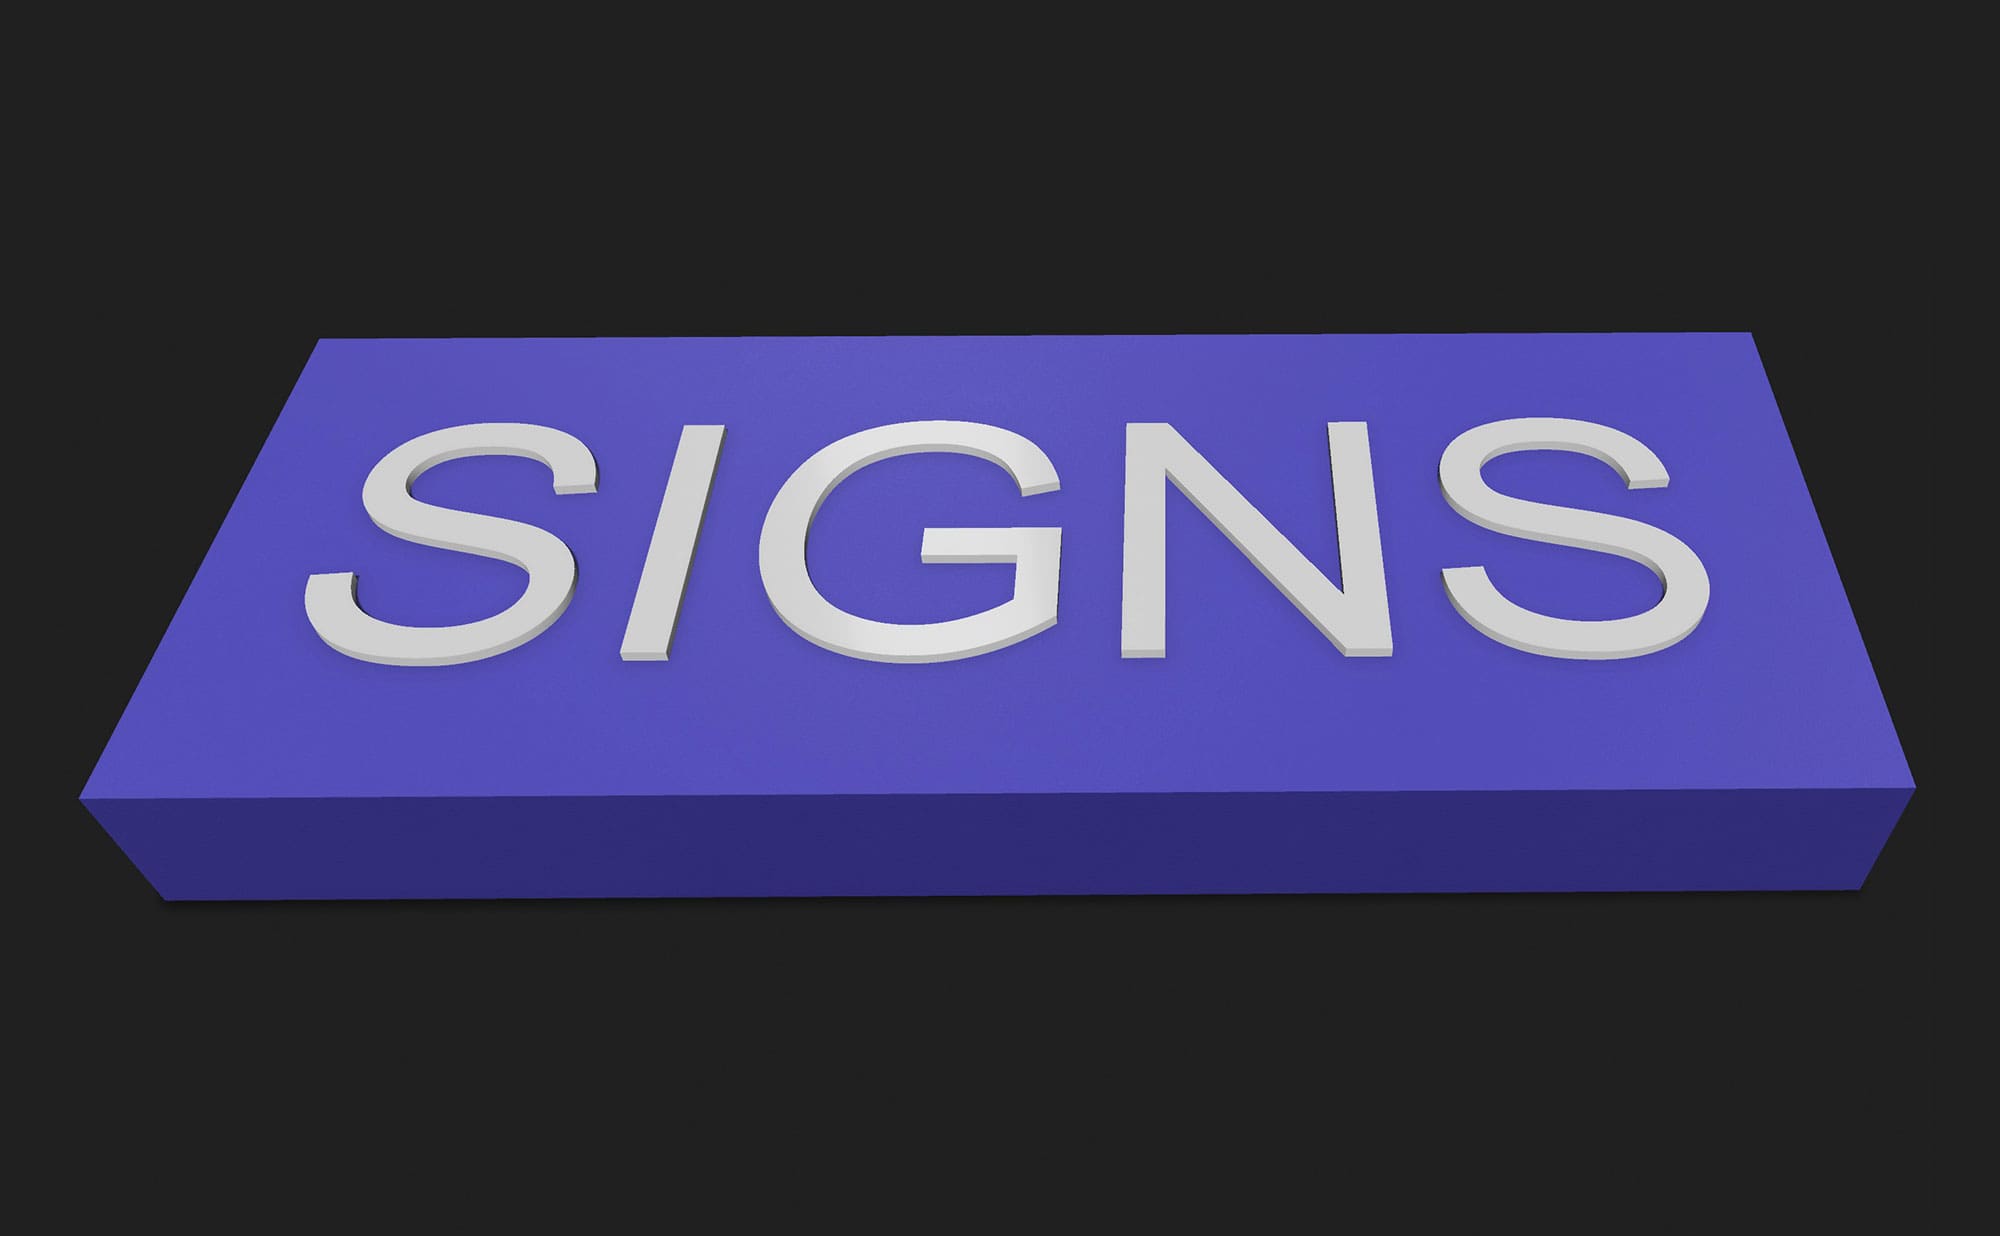 Light box signs content display model 4